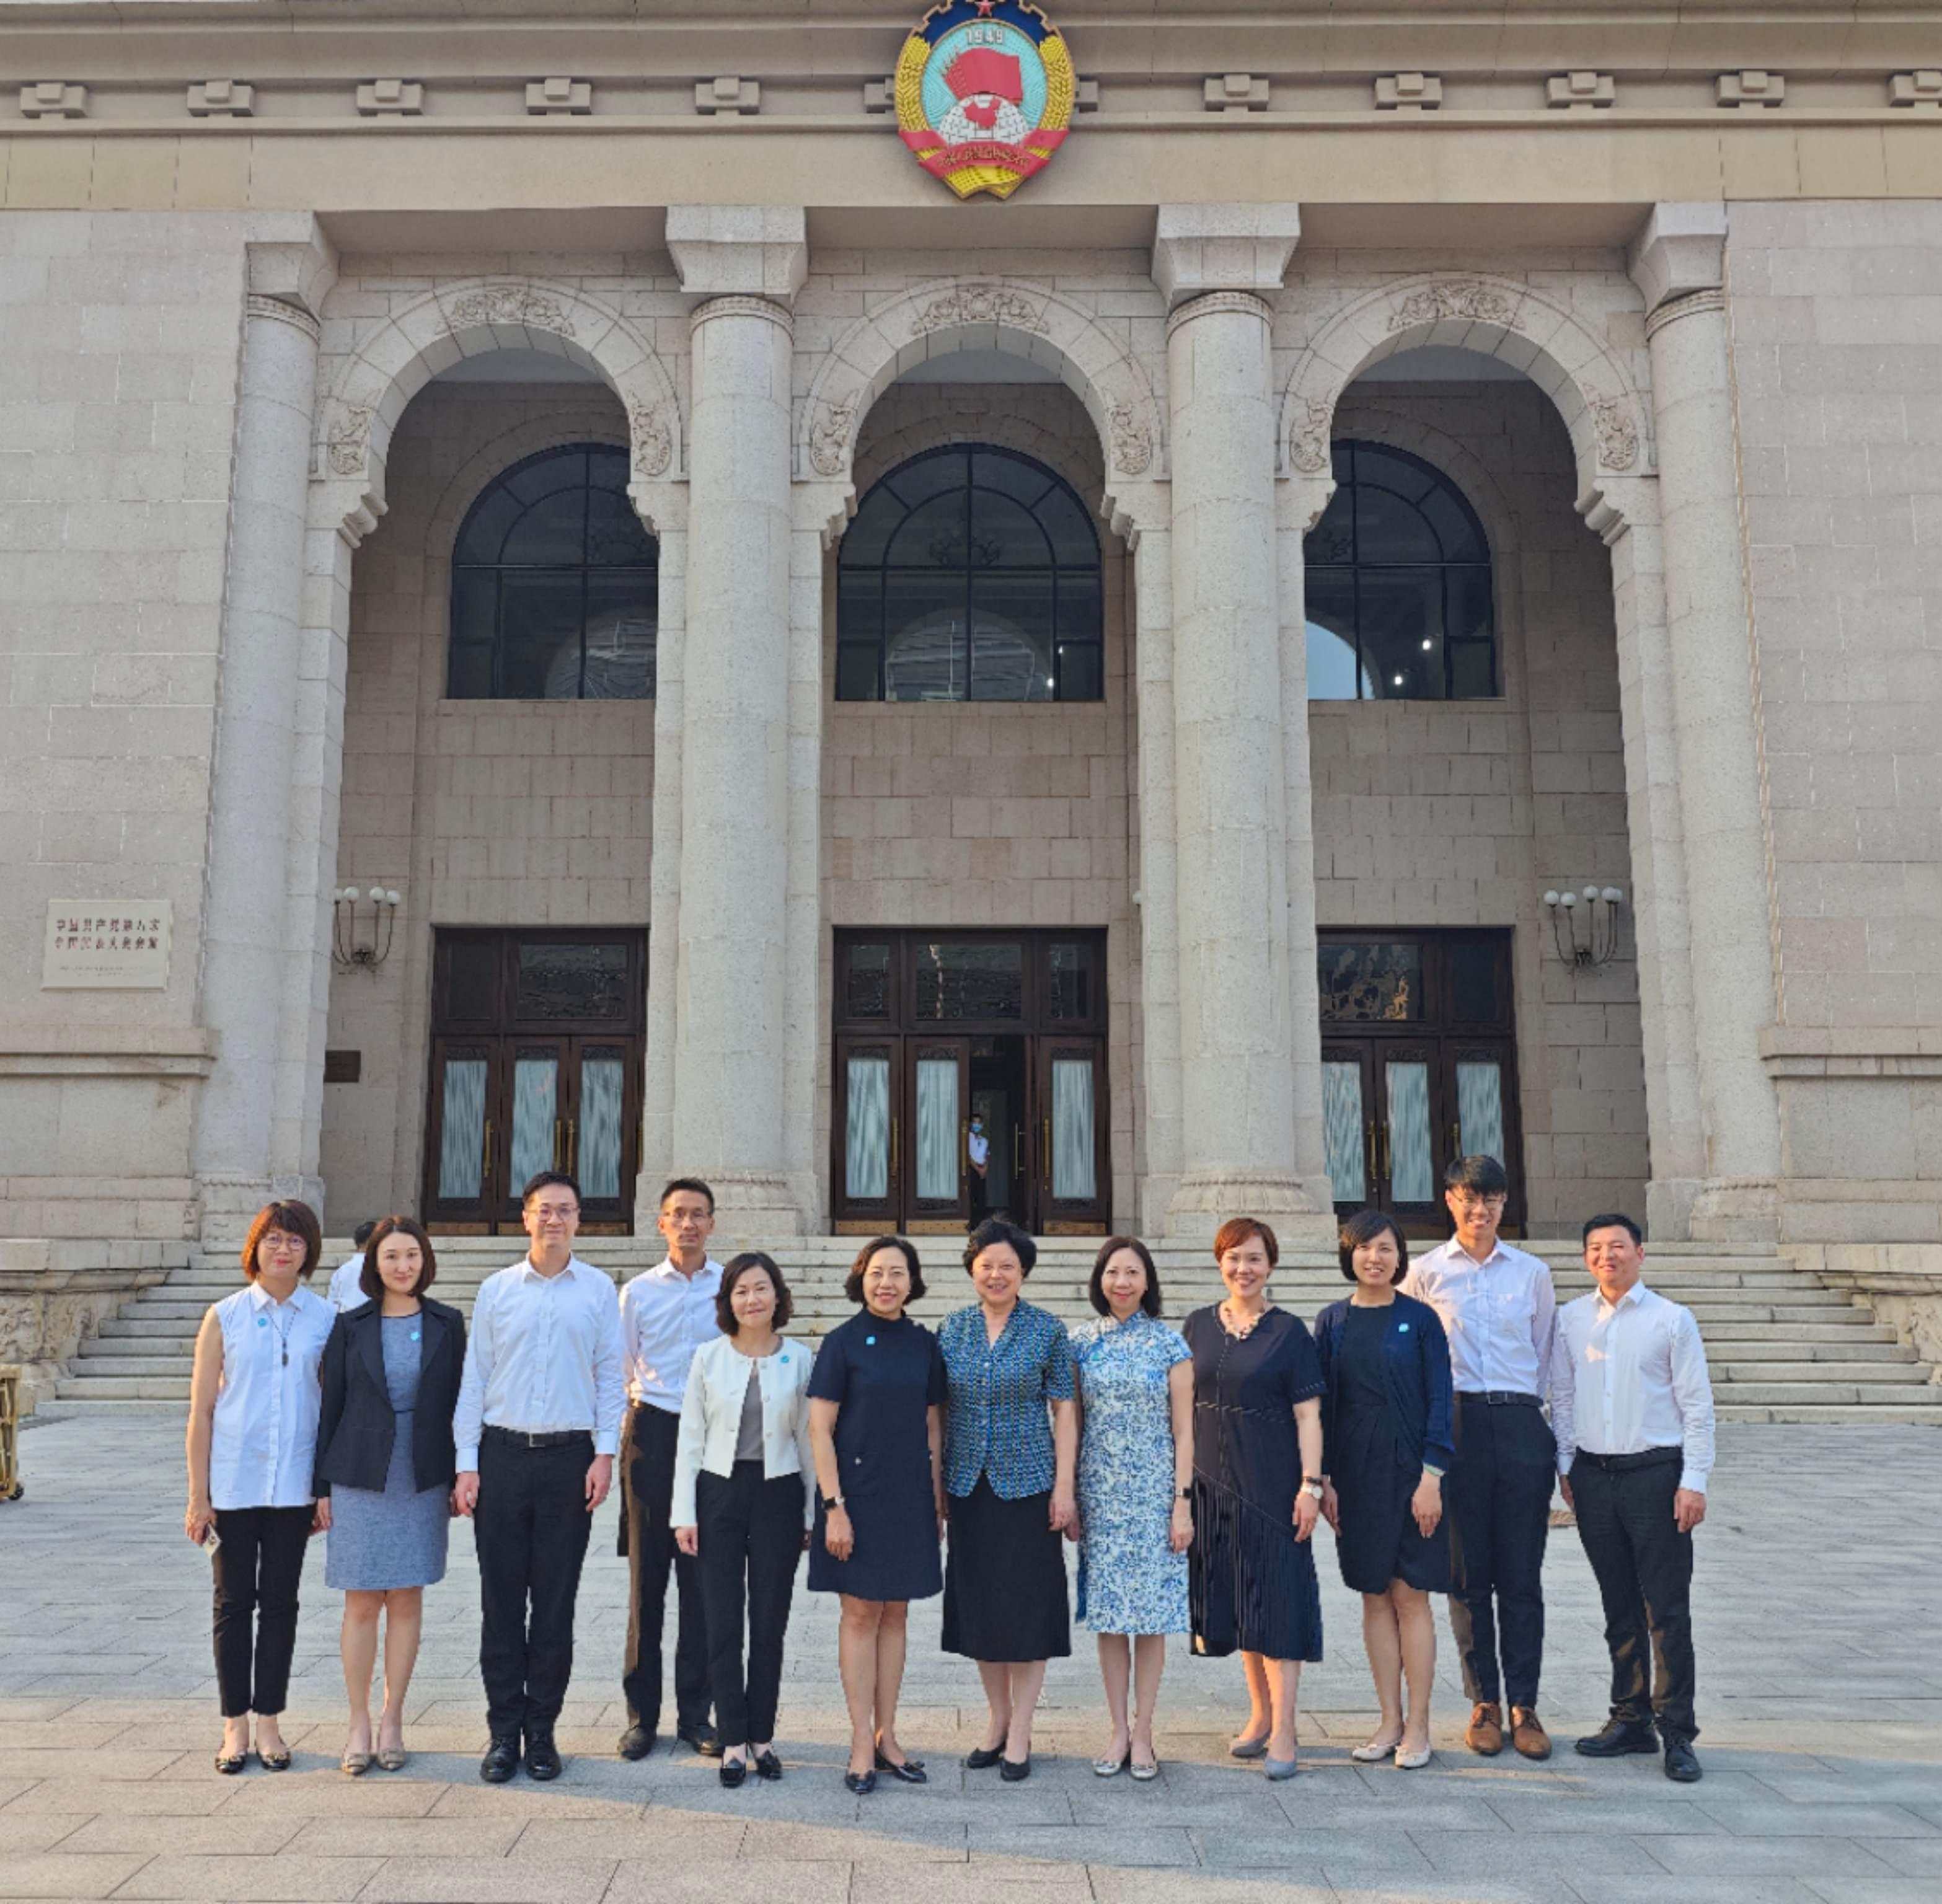 The Secretary for Home and Youth Affairs, Miss Alice Mak, continued her visit in Beijing today (July 18) and visited the Committee on Liaison with Hong Kong, Macao, Taiwan and Overseas Chinese of the National Committee of the Chinese People's Political Consultative Conference (CPPCC). Photo shows Miss Mak (sixth left); the Permanent Secretary for Home and Youth Affairs, Ms Shirley Lam (fifth right); the Director of Home Affairs, Mrs Alice Cheung (fifth left) and the director of the office of the Committee on Liaison with Hong Kong, Macao, Taiwan and Overseas Chinese of the National Committee of the CPPCC, Ms Cao Jun (sixth right).